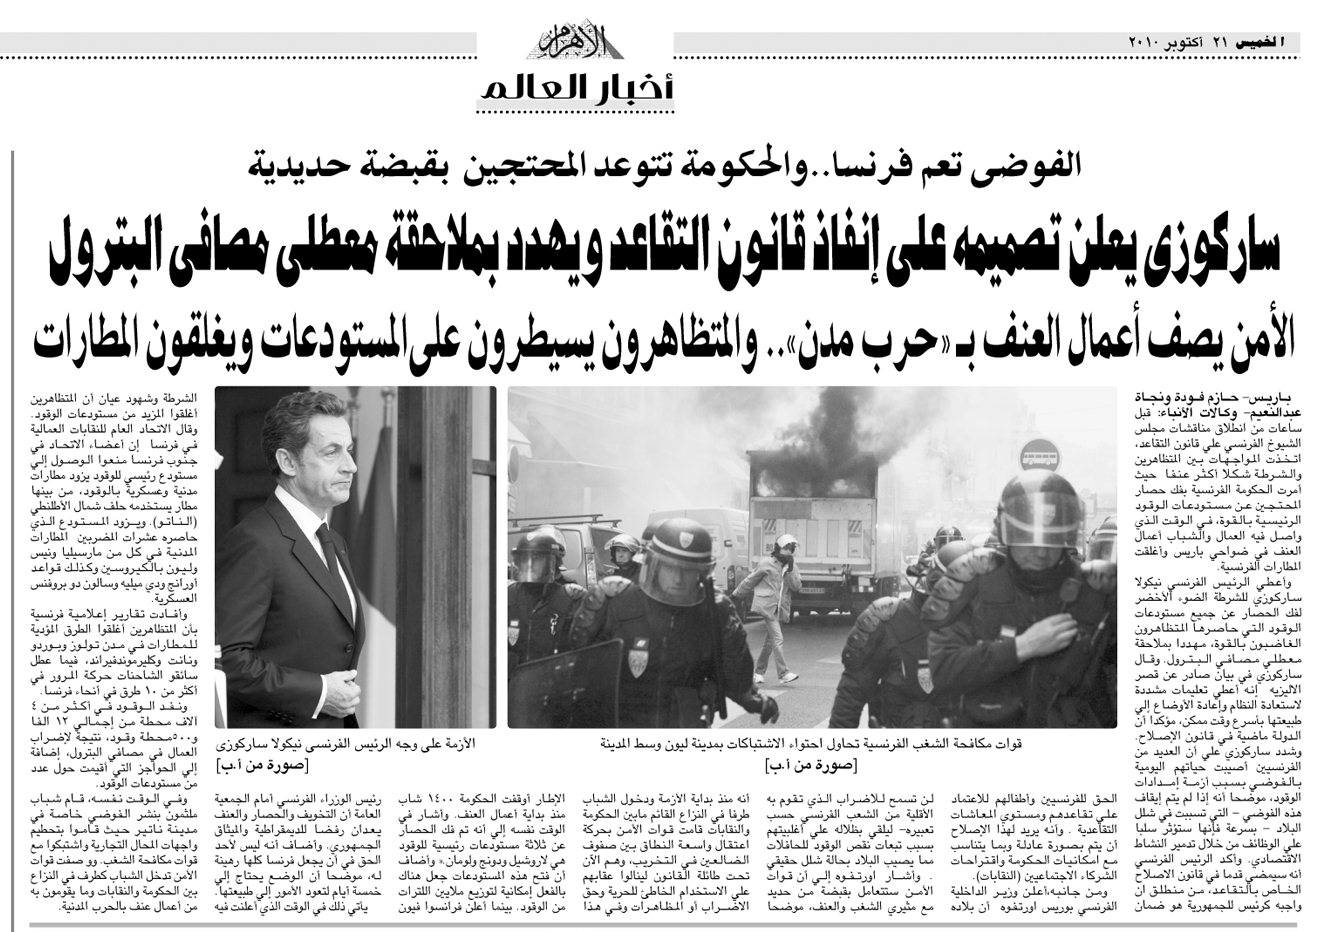 The French President Nicolas Sarkozy's war against unions as reported on page 8 of the Egyptian daily Al-Ahram, October 21, 2010.